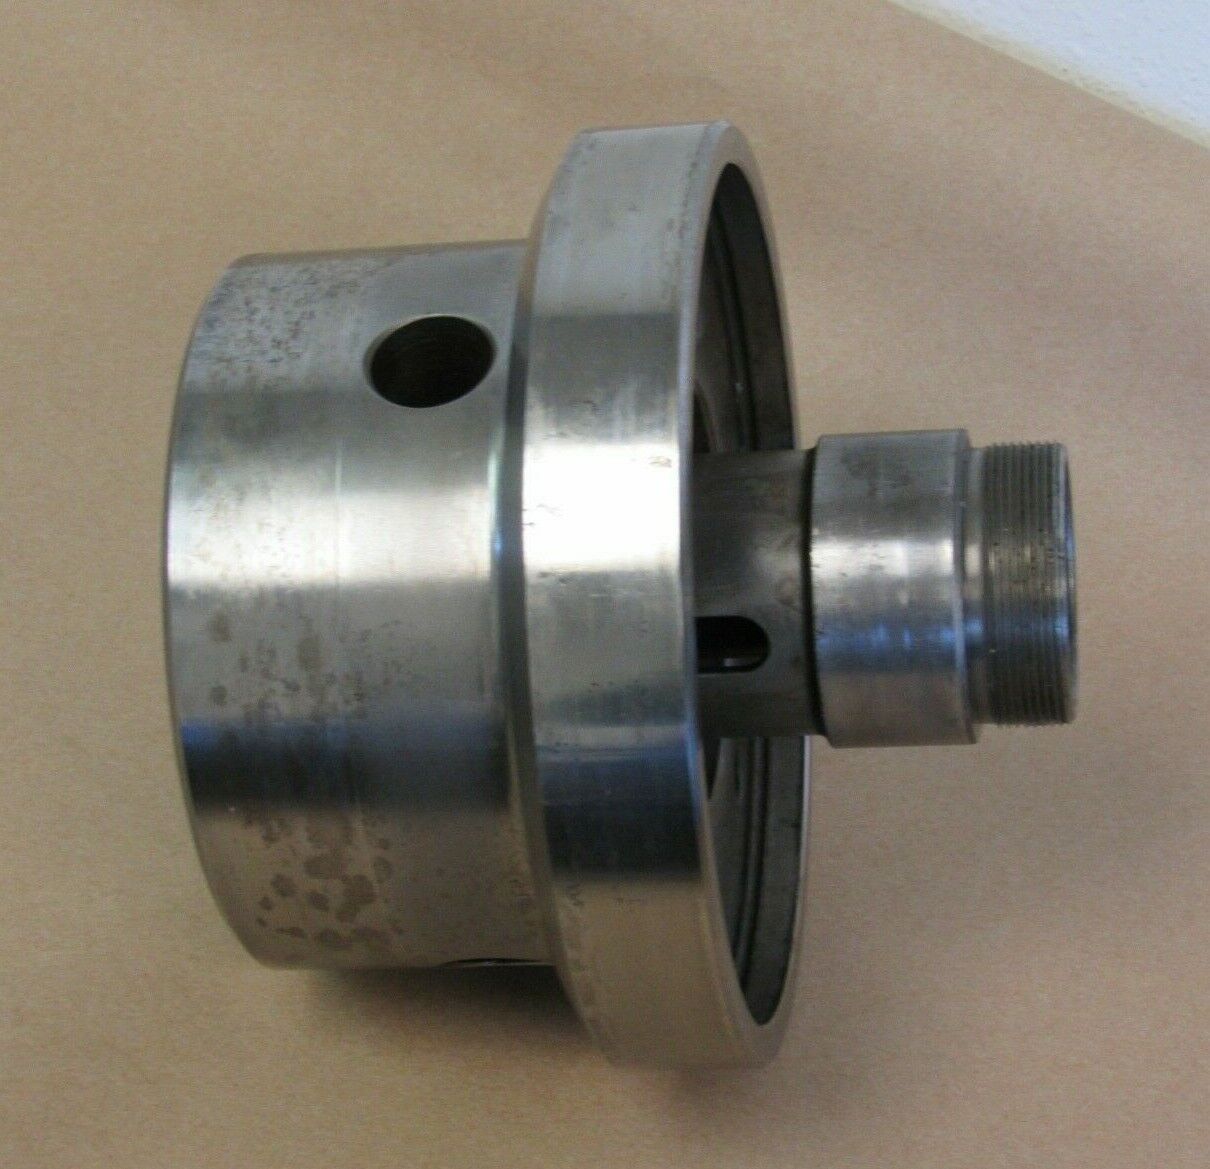 COLLET CHUCK, PARTS FROM MIYANO CNC LATHE S/N 7051654